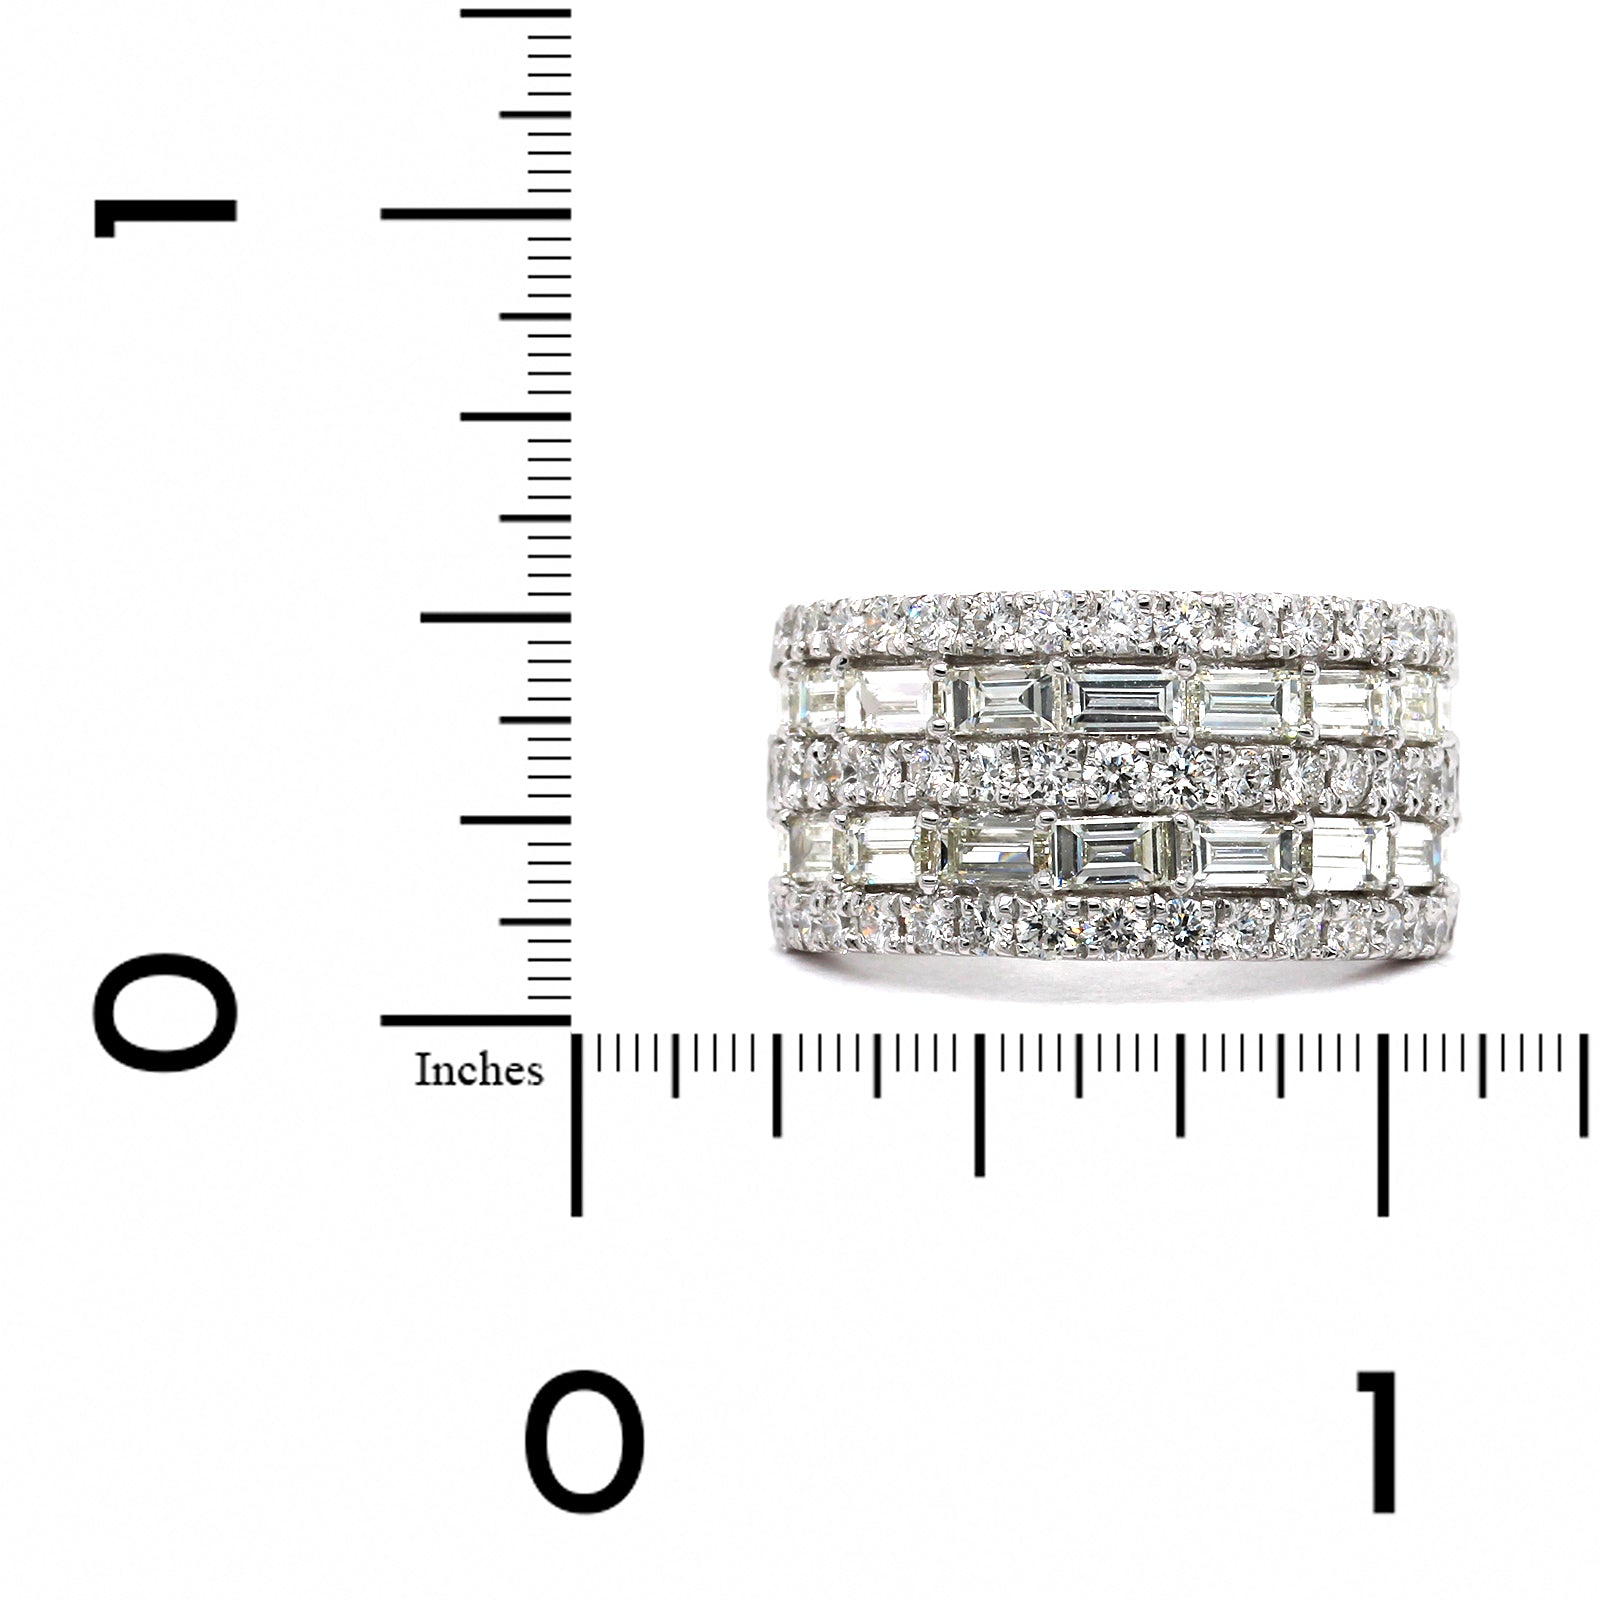 14K White Gold 5 Row Round and Baguette Diamond Ring, 14k white gold, Long's Jewelers